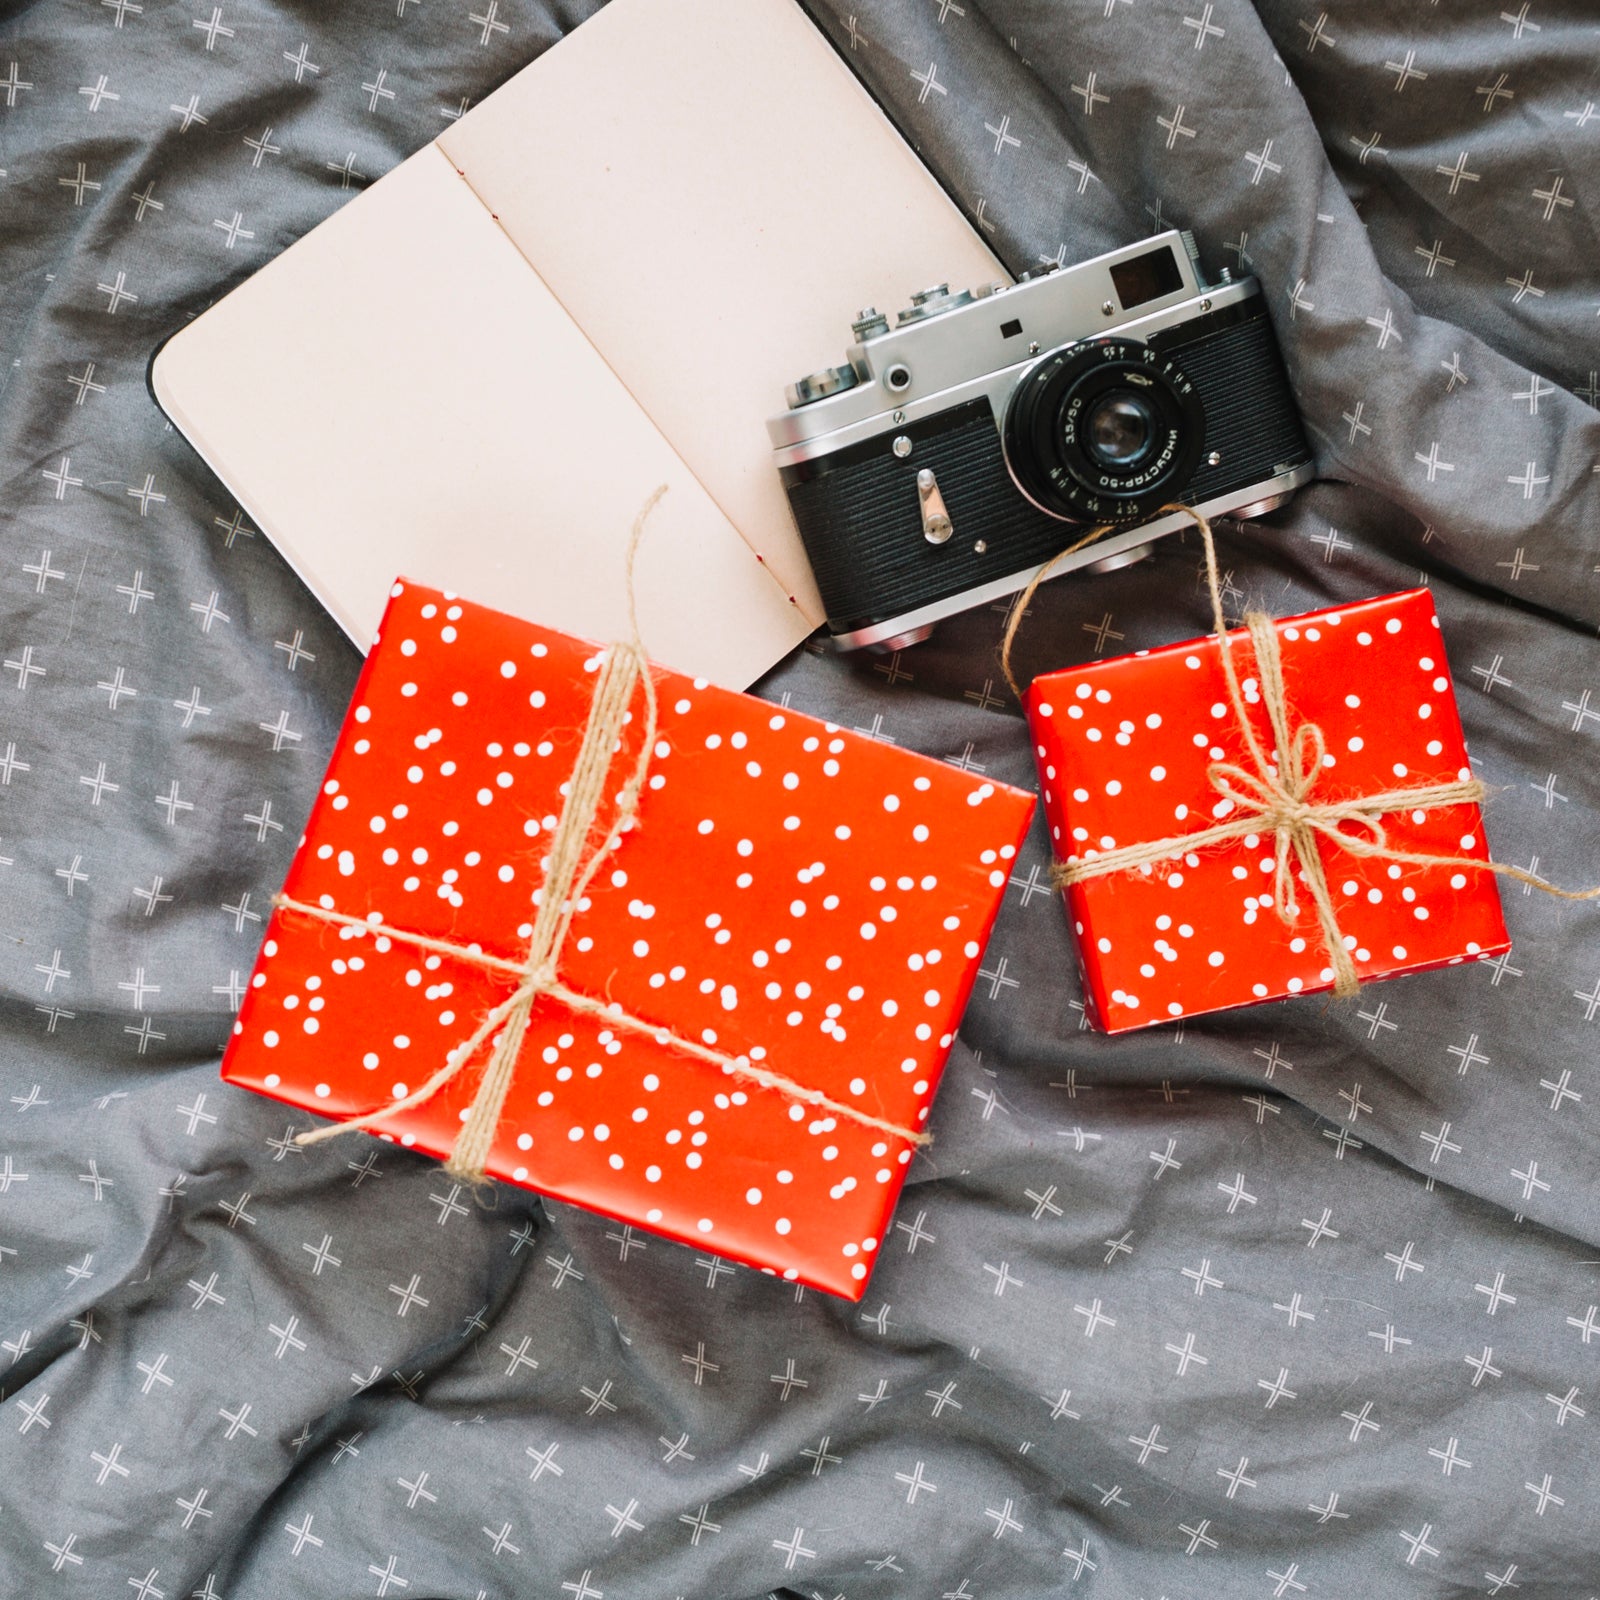 Surprise Your Shutterbug Friend. Quirky Gift Ideas for Photographers.